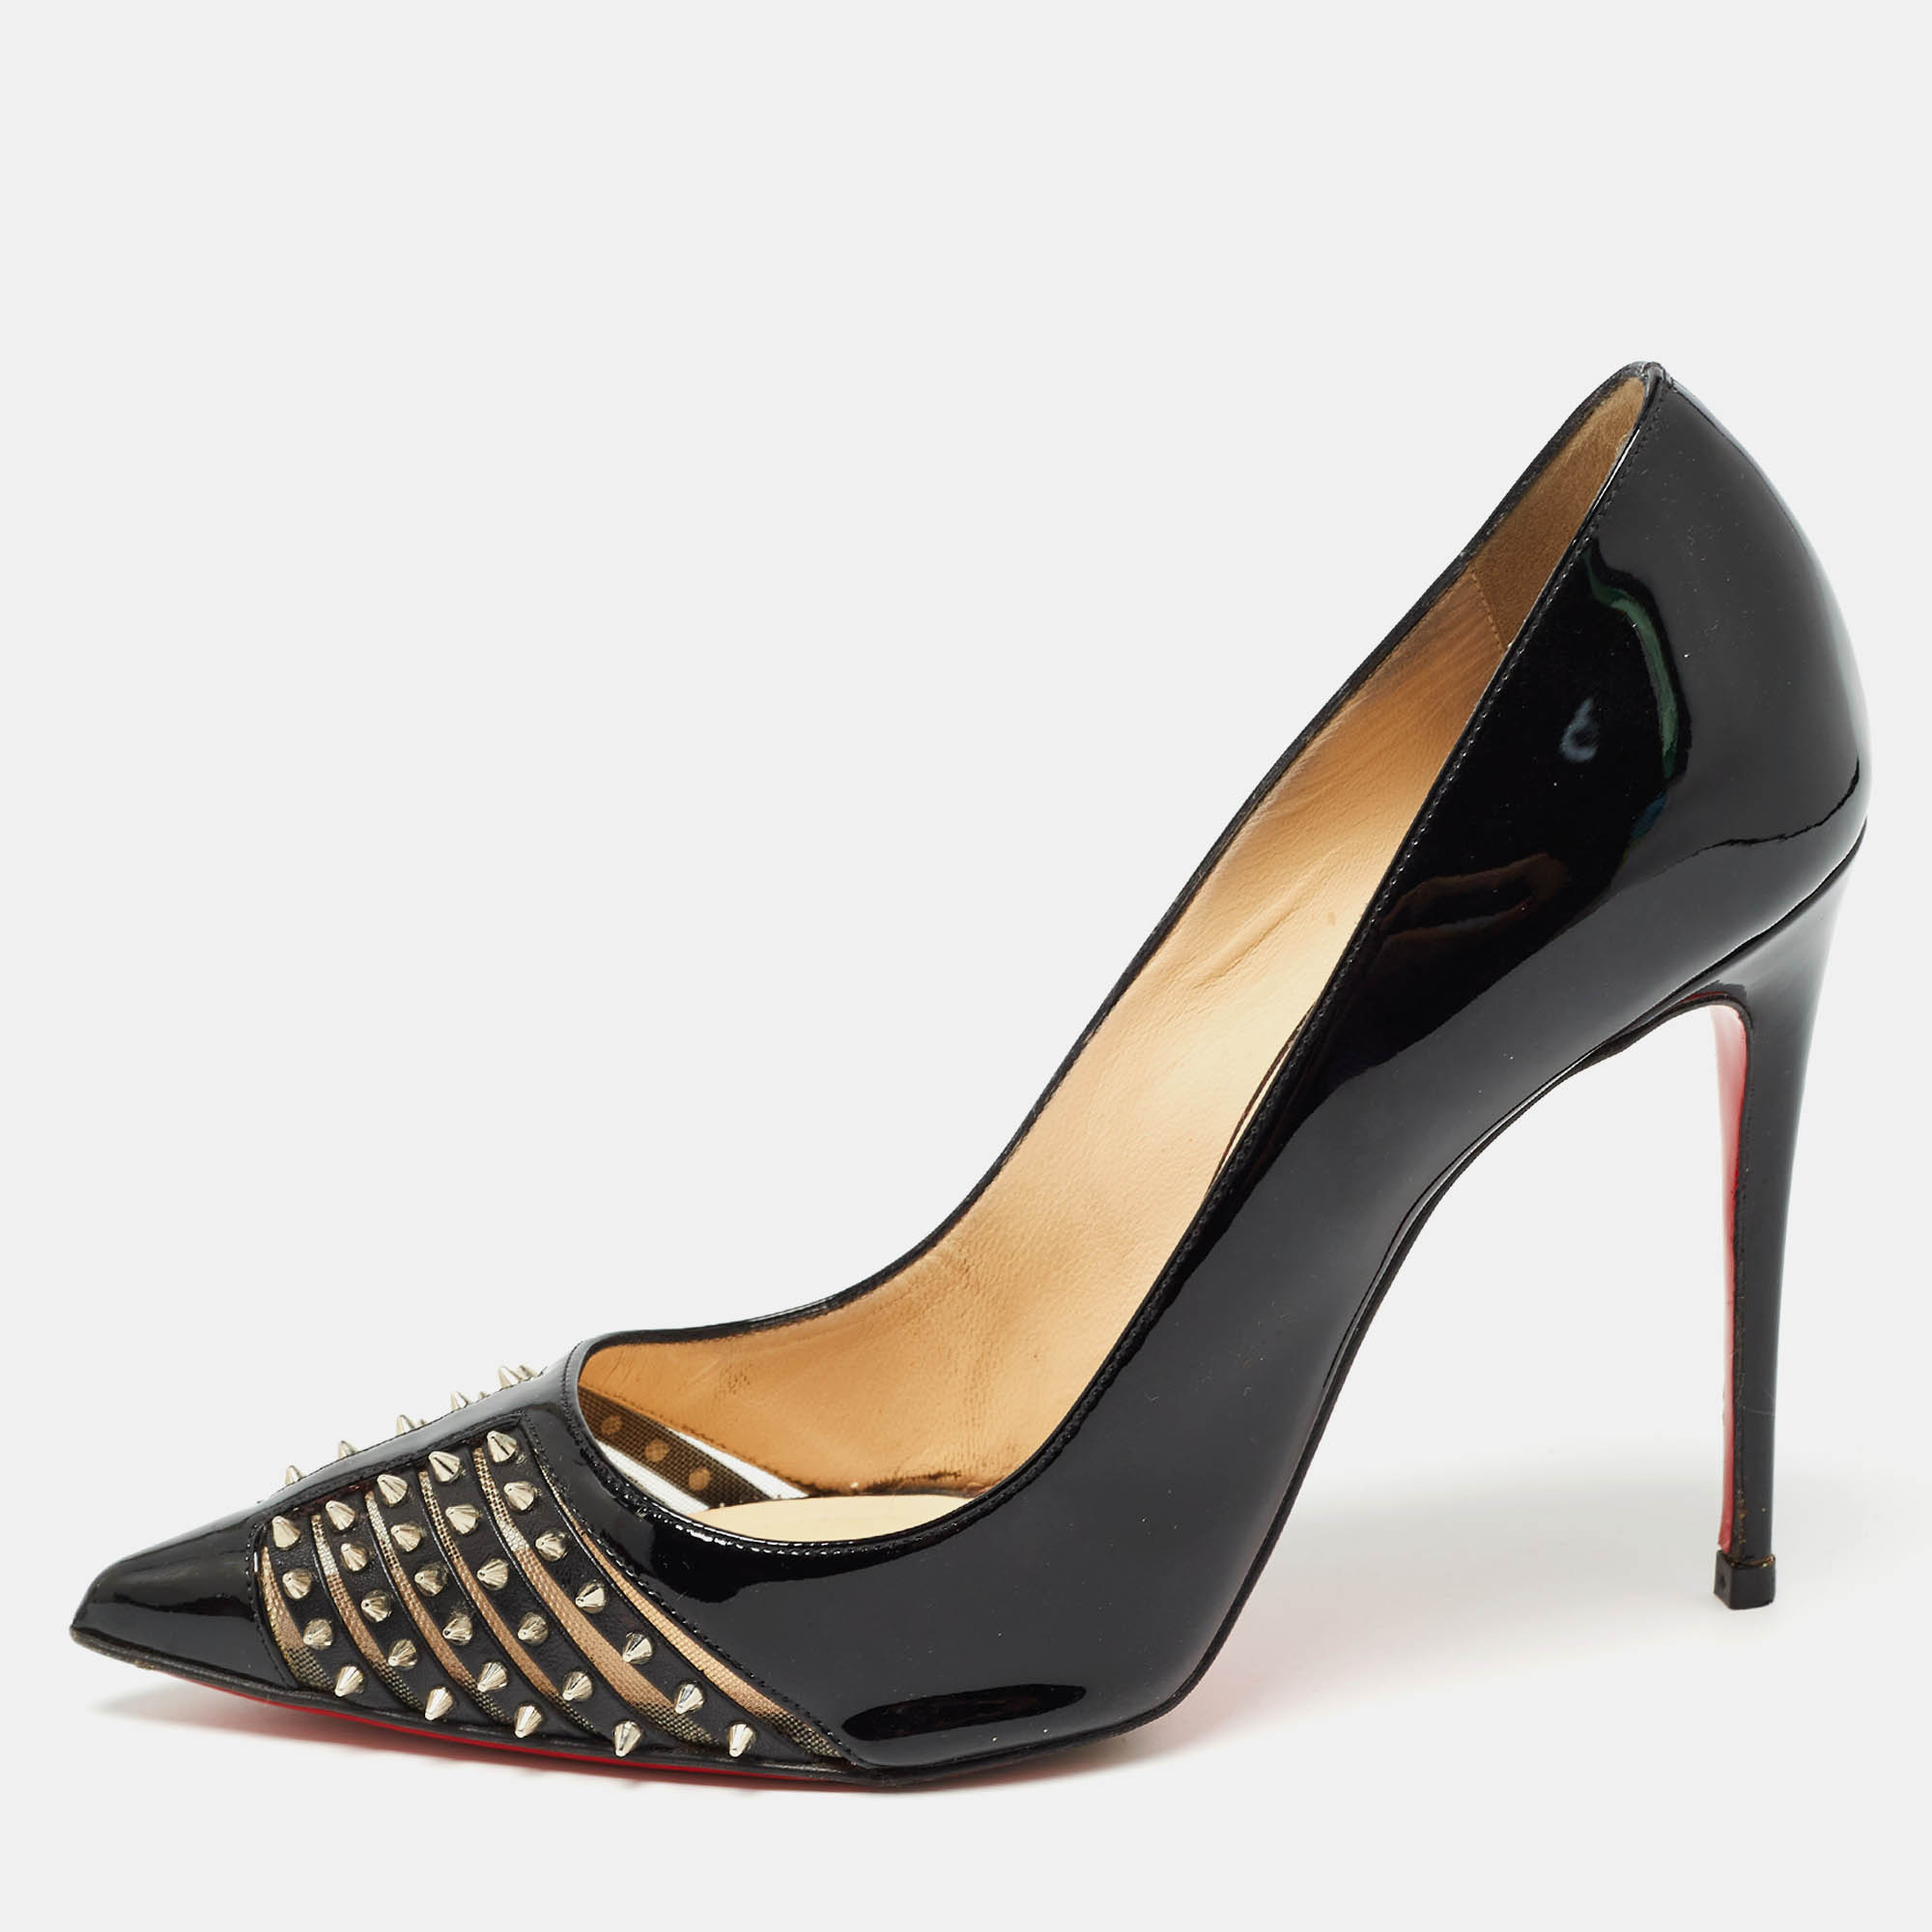 Glamorous and appealing these Bareta pumps from the House of Christian Louboutin will certainly leave you looking spectacular for the day. They are made from black patent leather with Spike accents elevating their beauty. They showcase pointed toes and slim heels. Enrich your style by wearing these CL beauties.